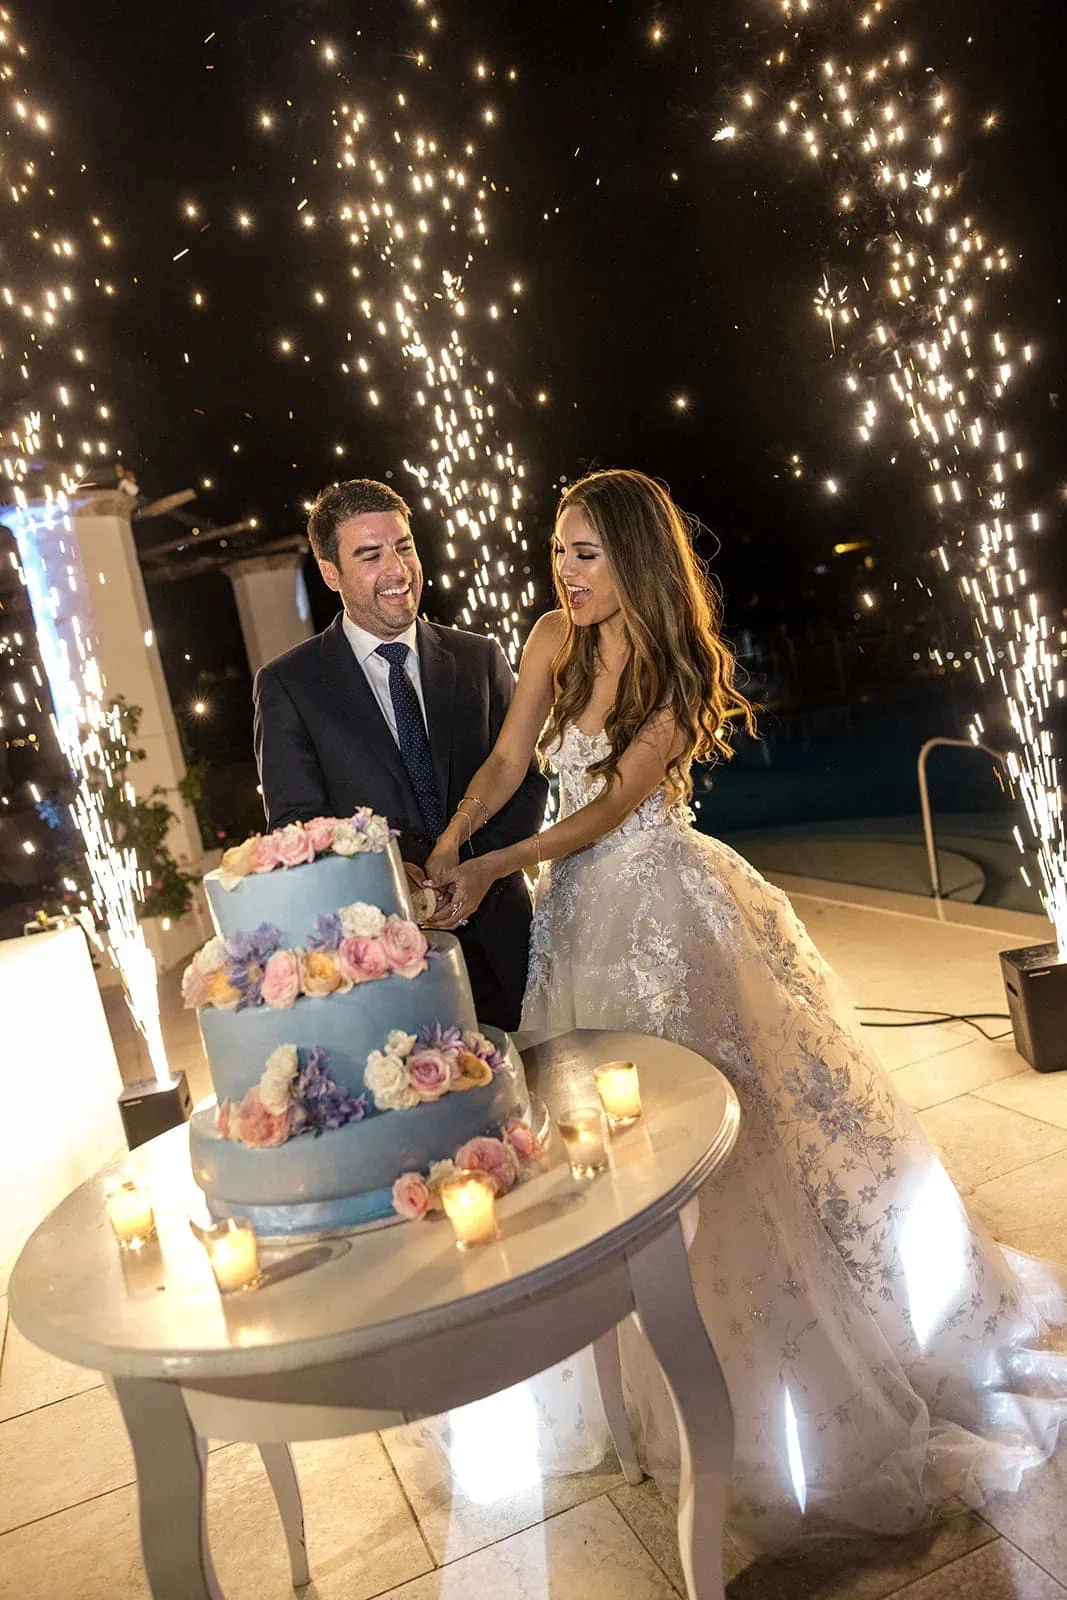 Bride and groom cut the cake with fireworks in background